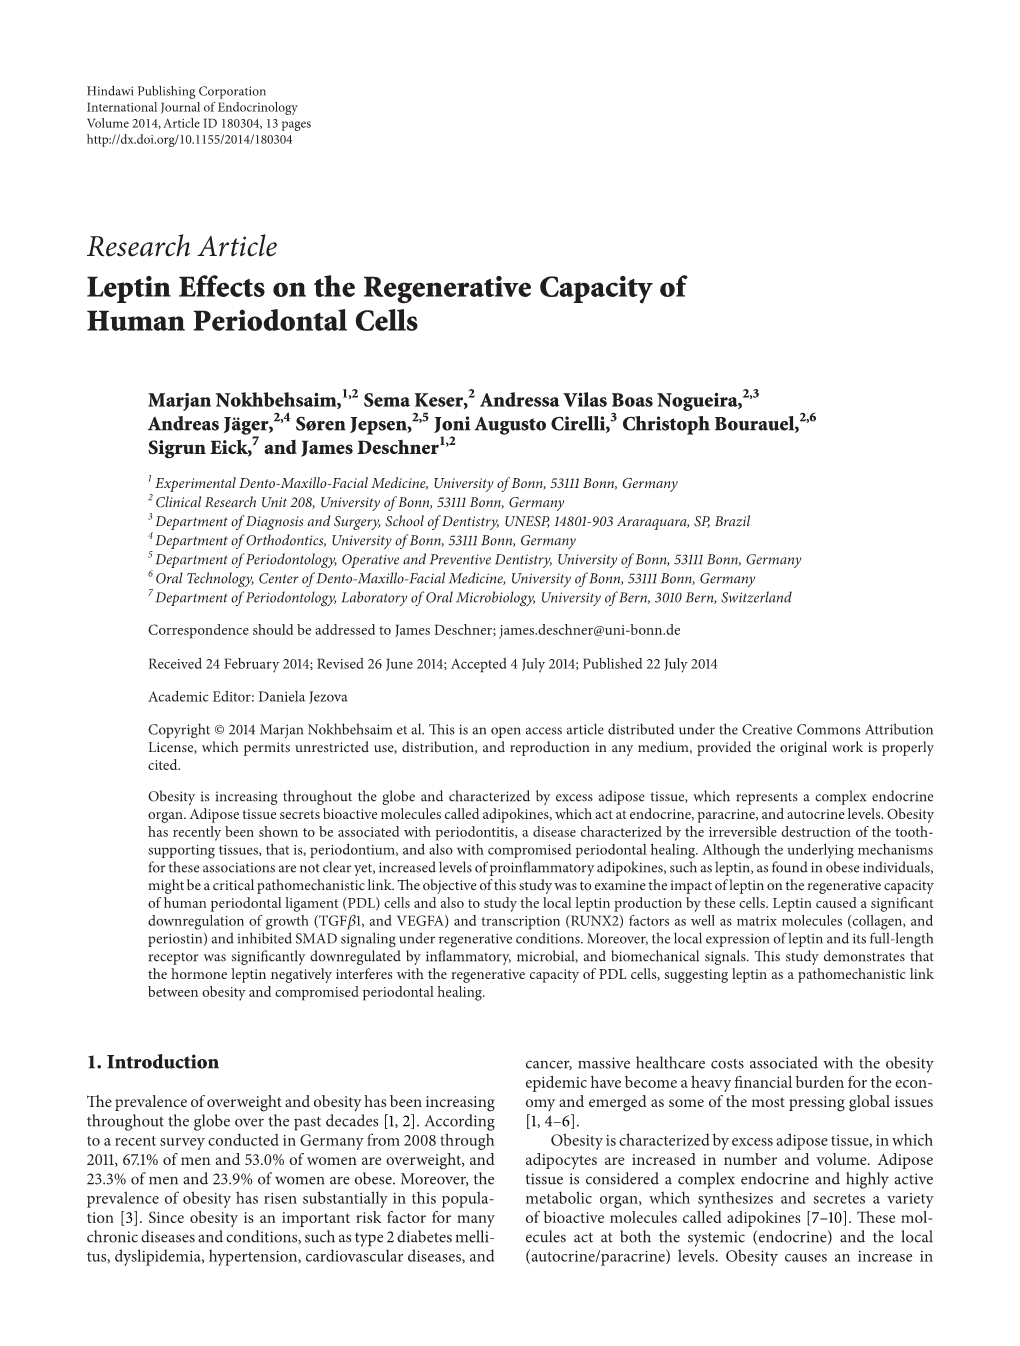 Research Article Leptin Effects on the Regenerative Capacity of Human Periodontal Cells